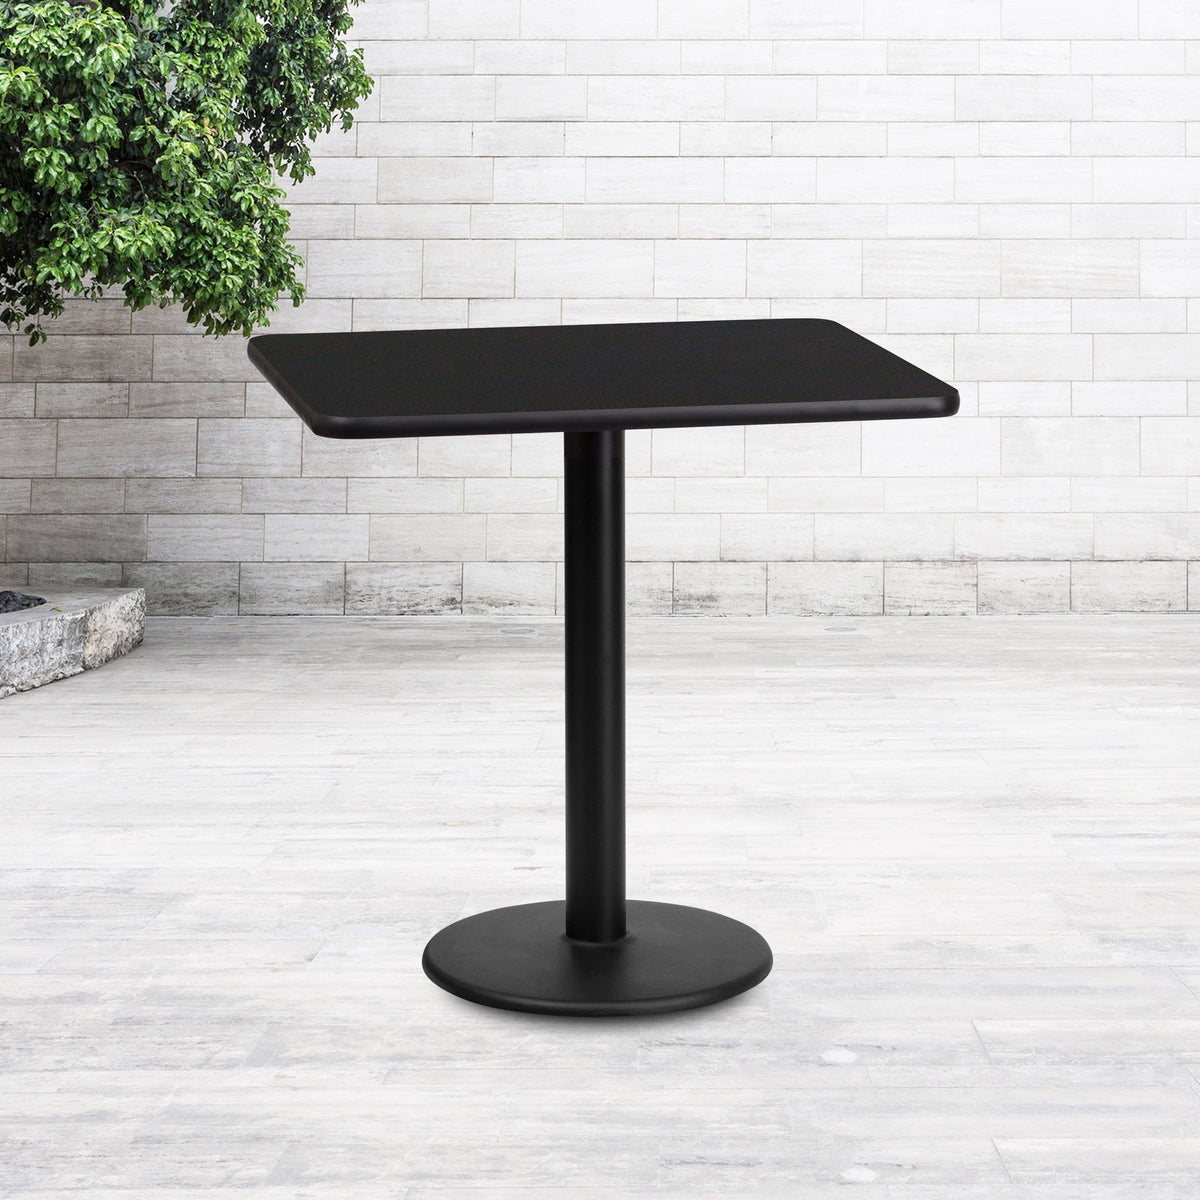 Black |#| 24inch x 30inch Rectangular Black Laminate Table Top with 18inch Round Table Height Base